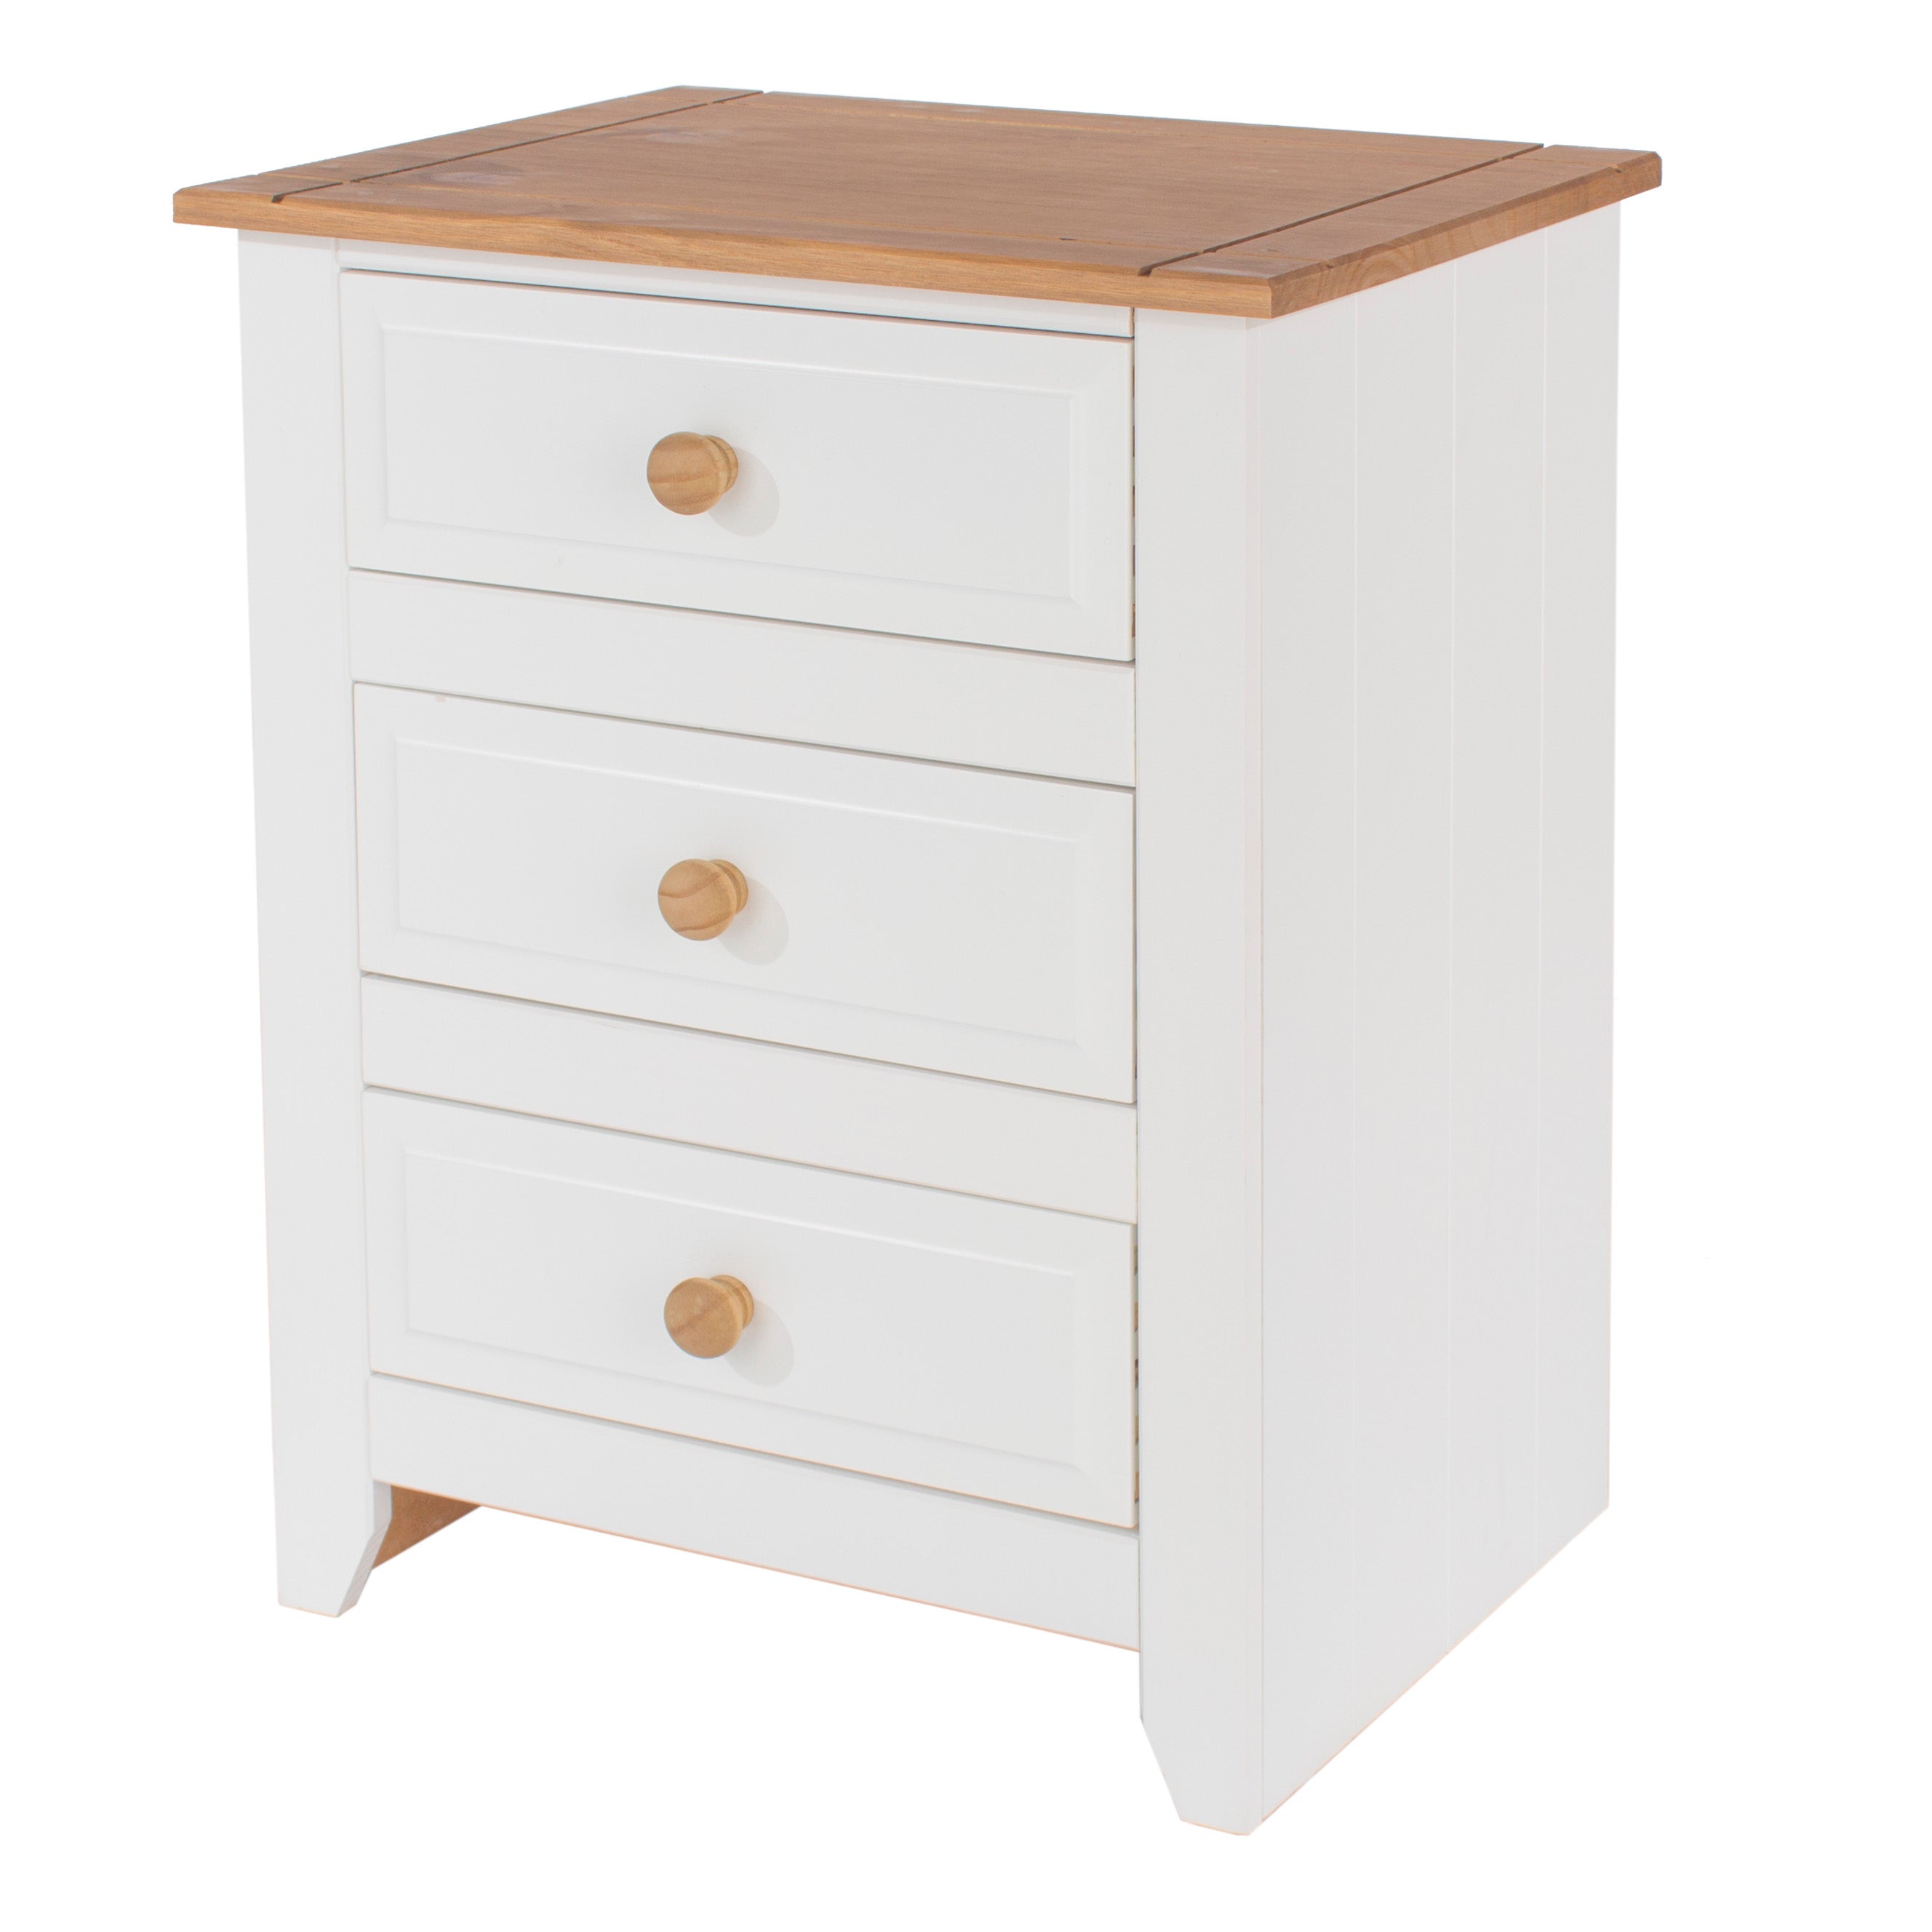 3 Drawer Home Cabinet 